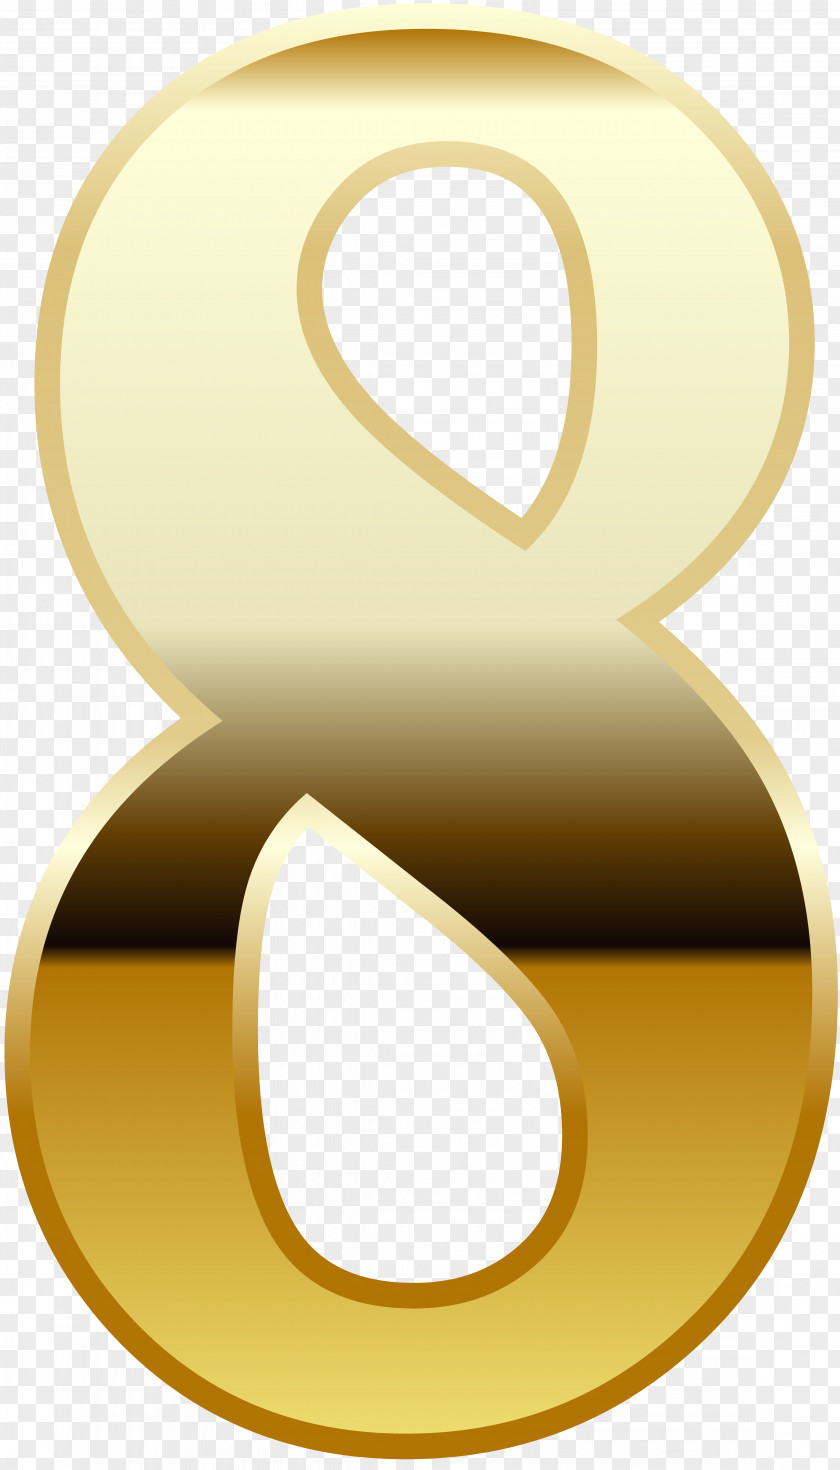 Gold Number Eight Image File Formats Lossless Compression PNG